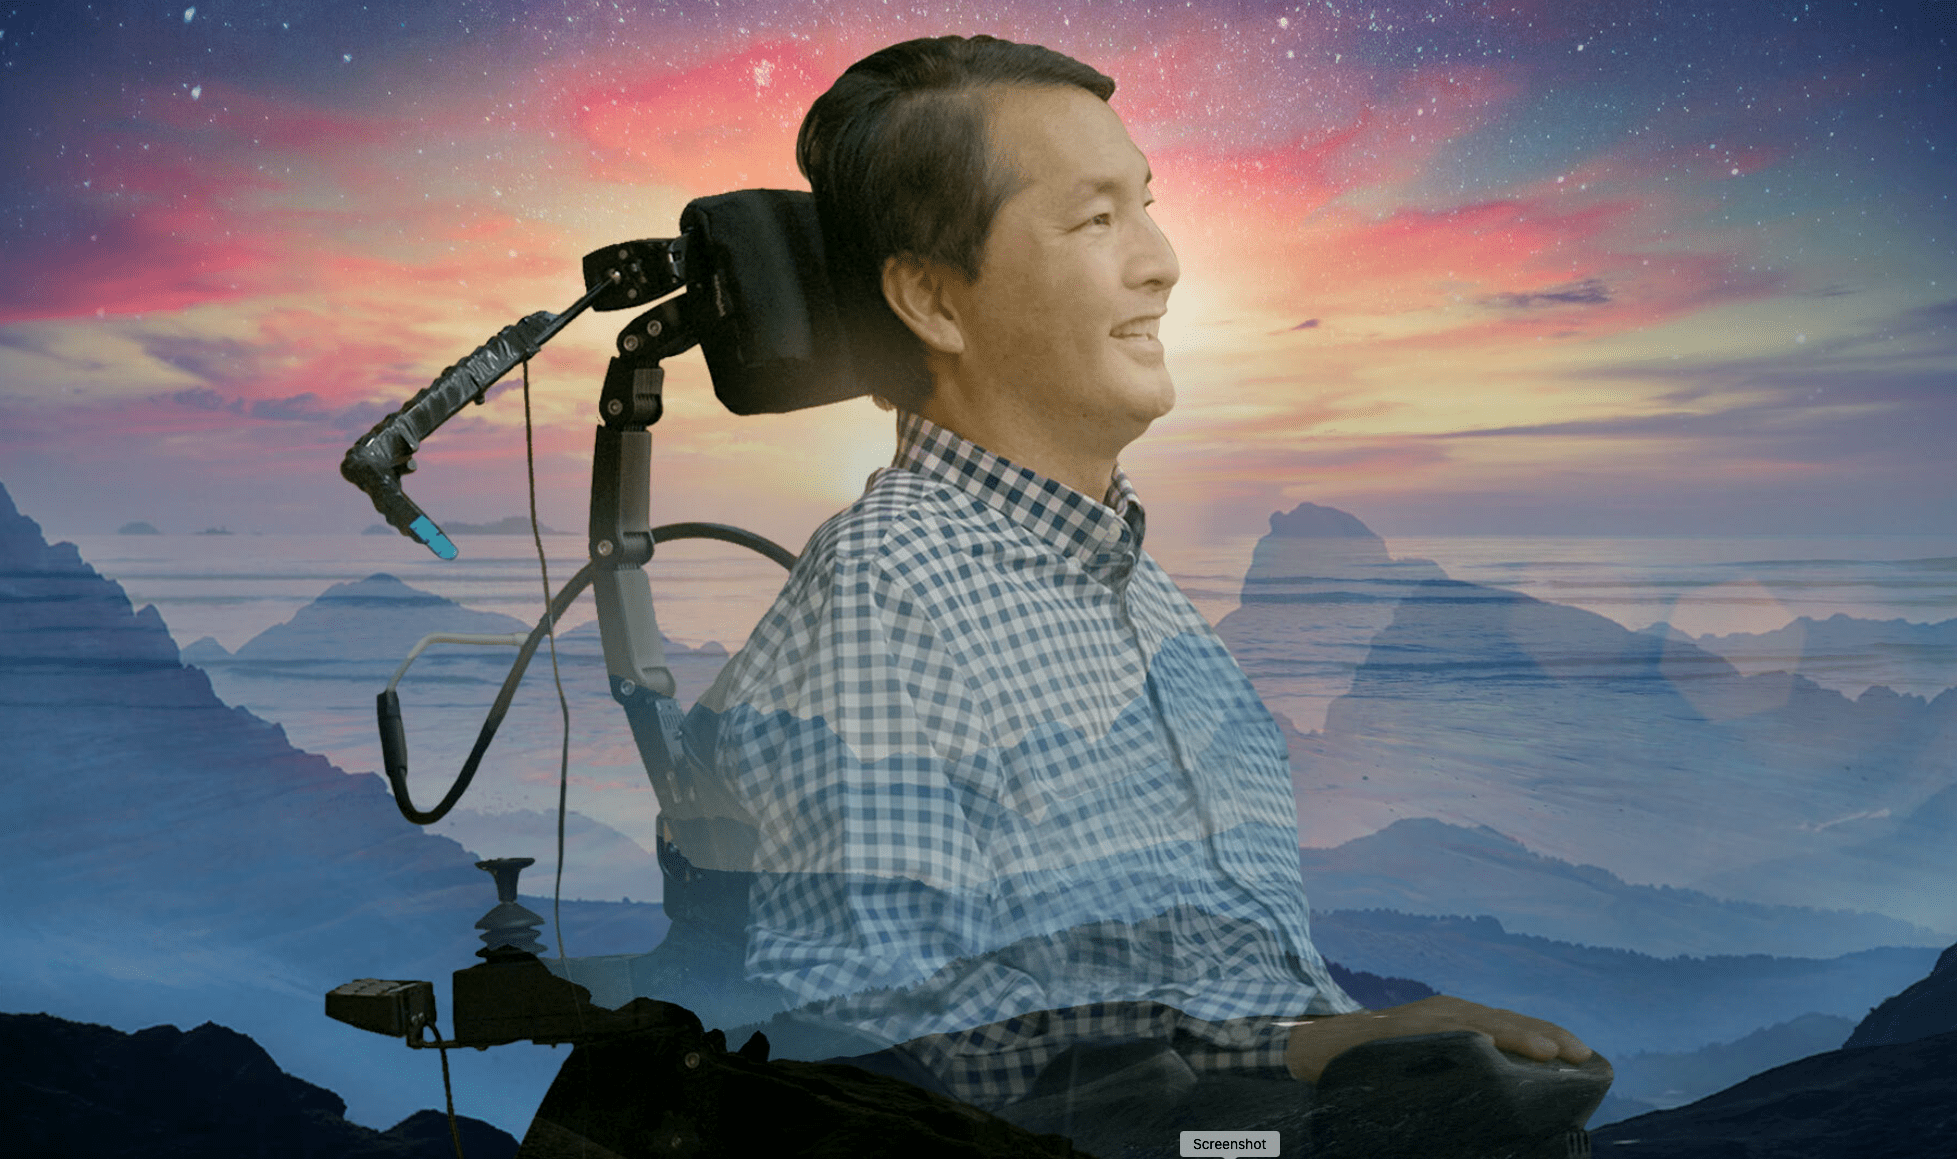 An Asian American man in profile, sitting in a power wheelchair with image of sunset and mountains behind him